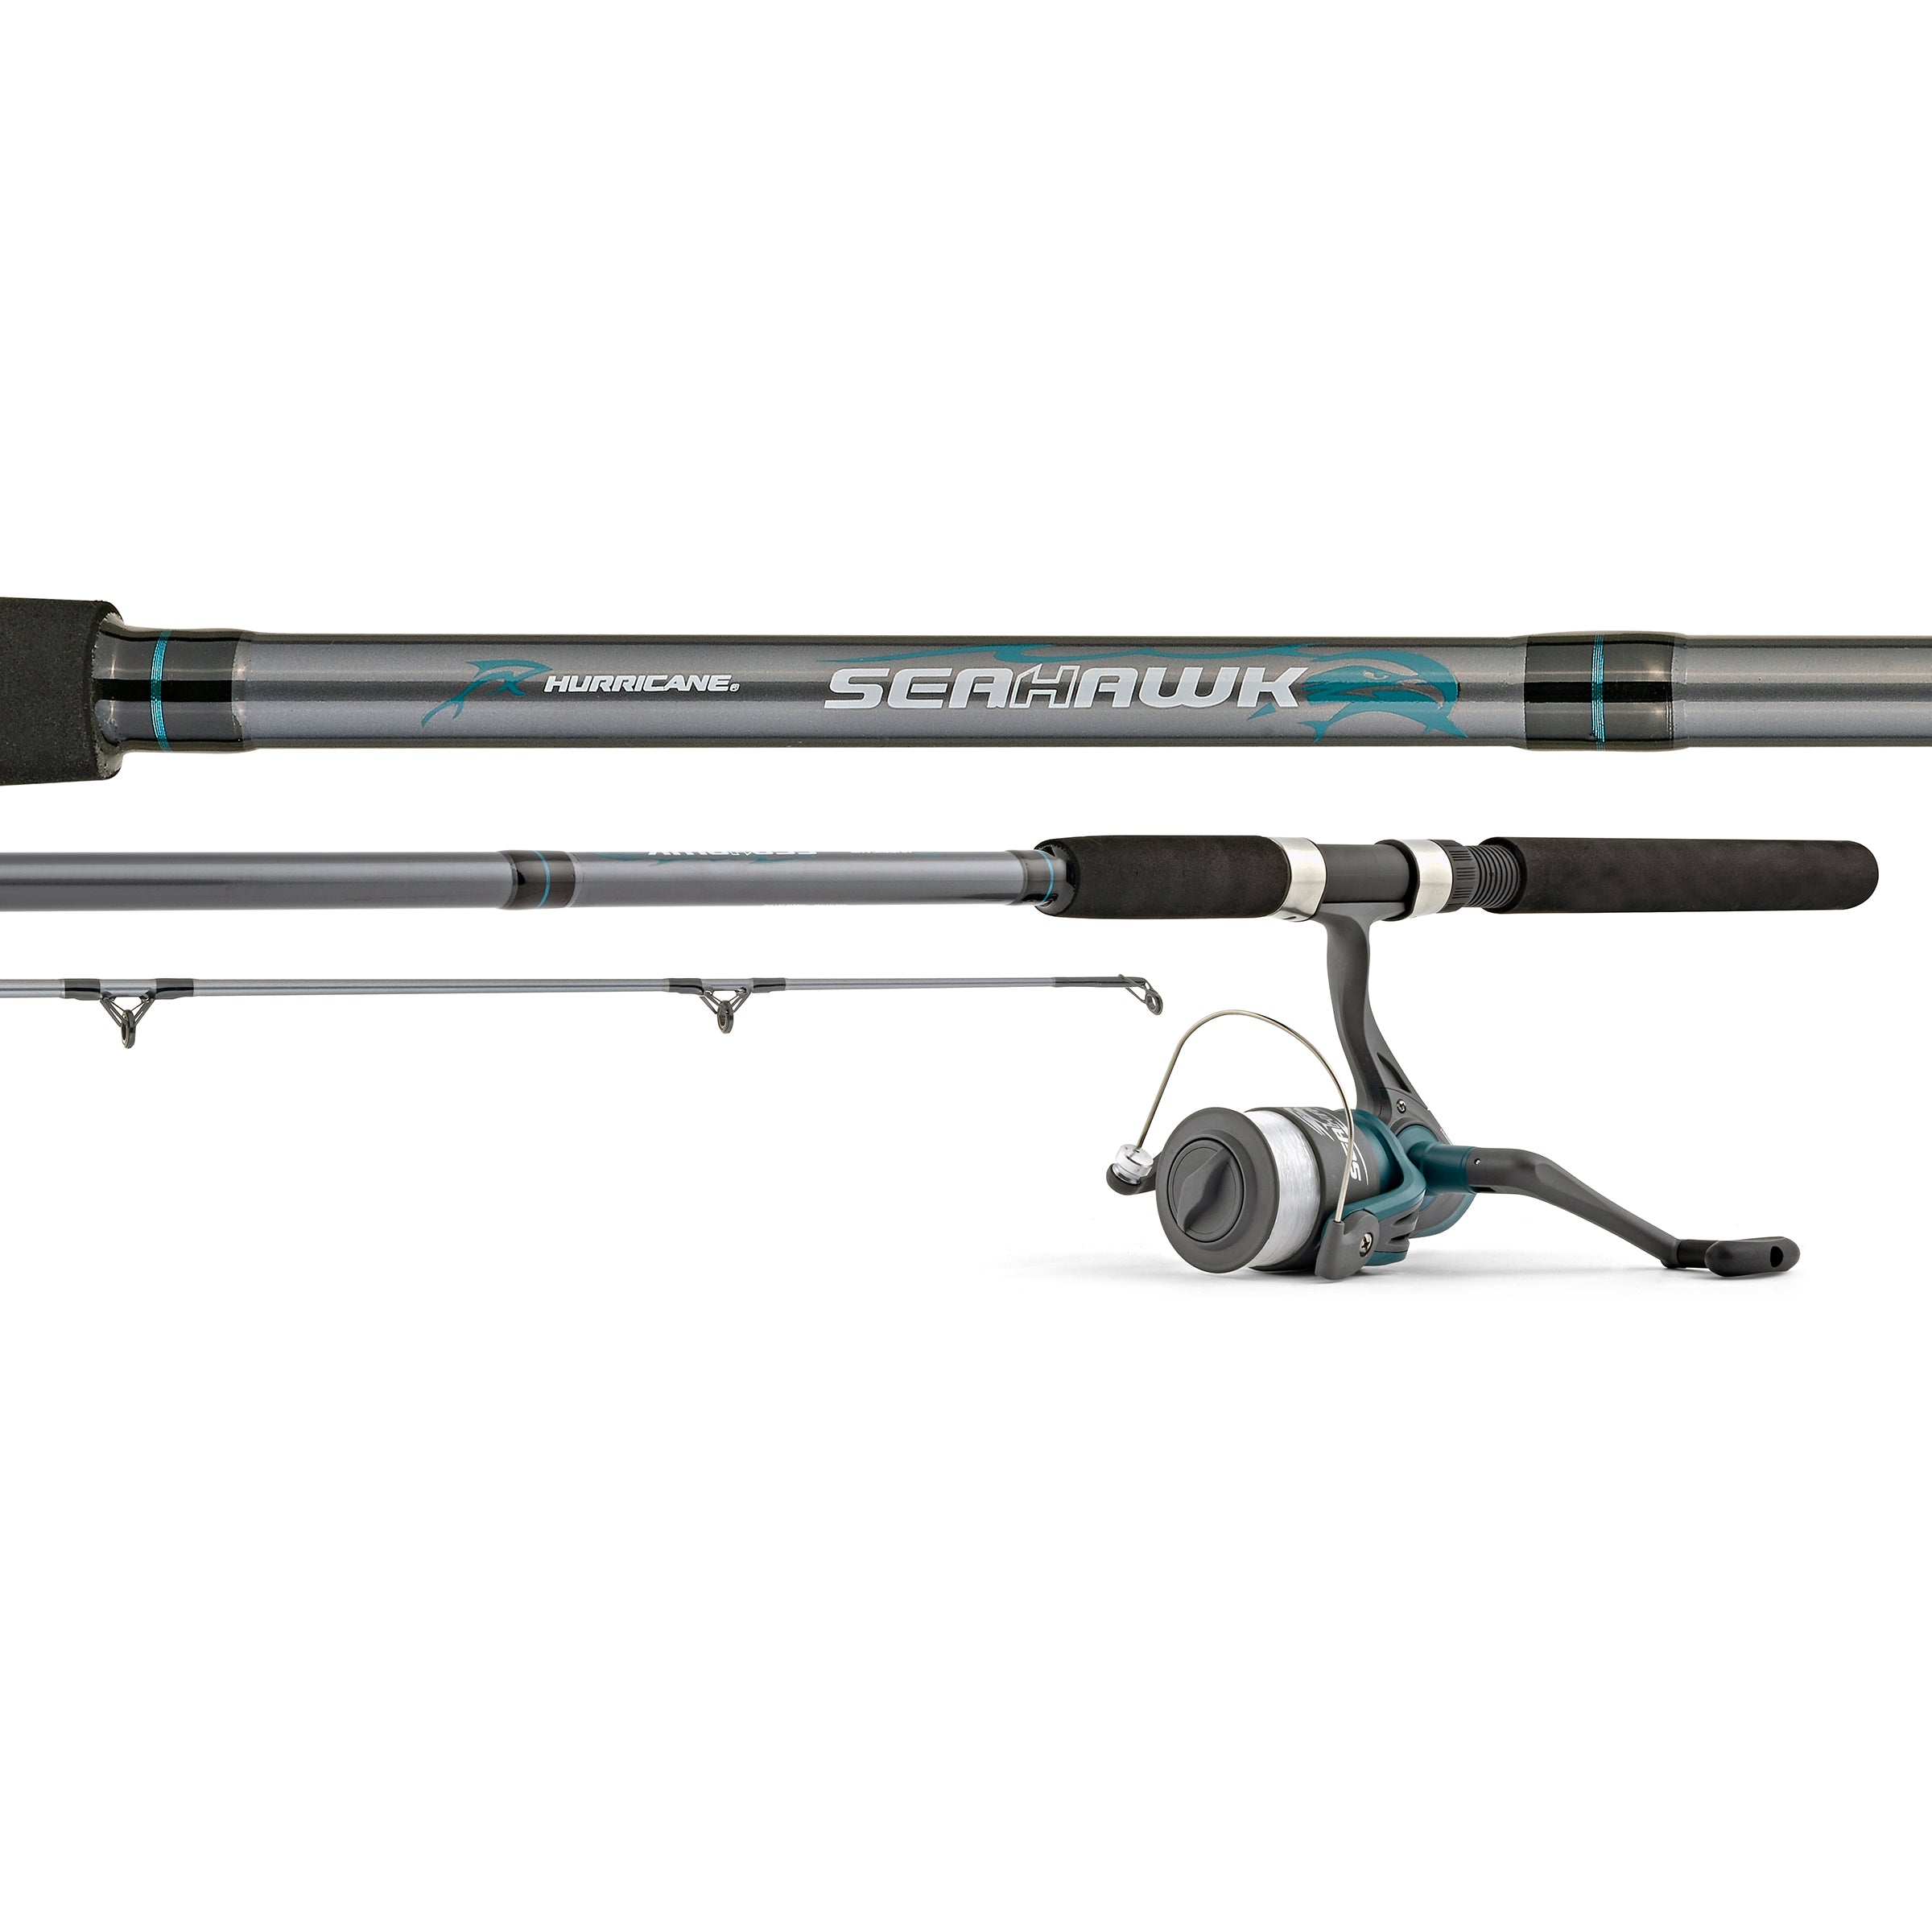 Seahawk 11 ft Surf Spinning Fishing Rod 15-25 lbs